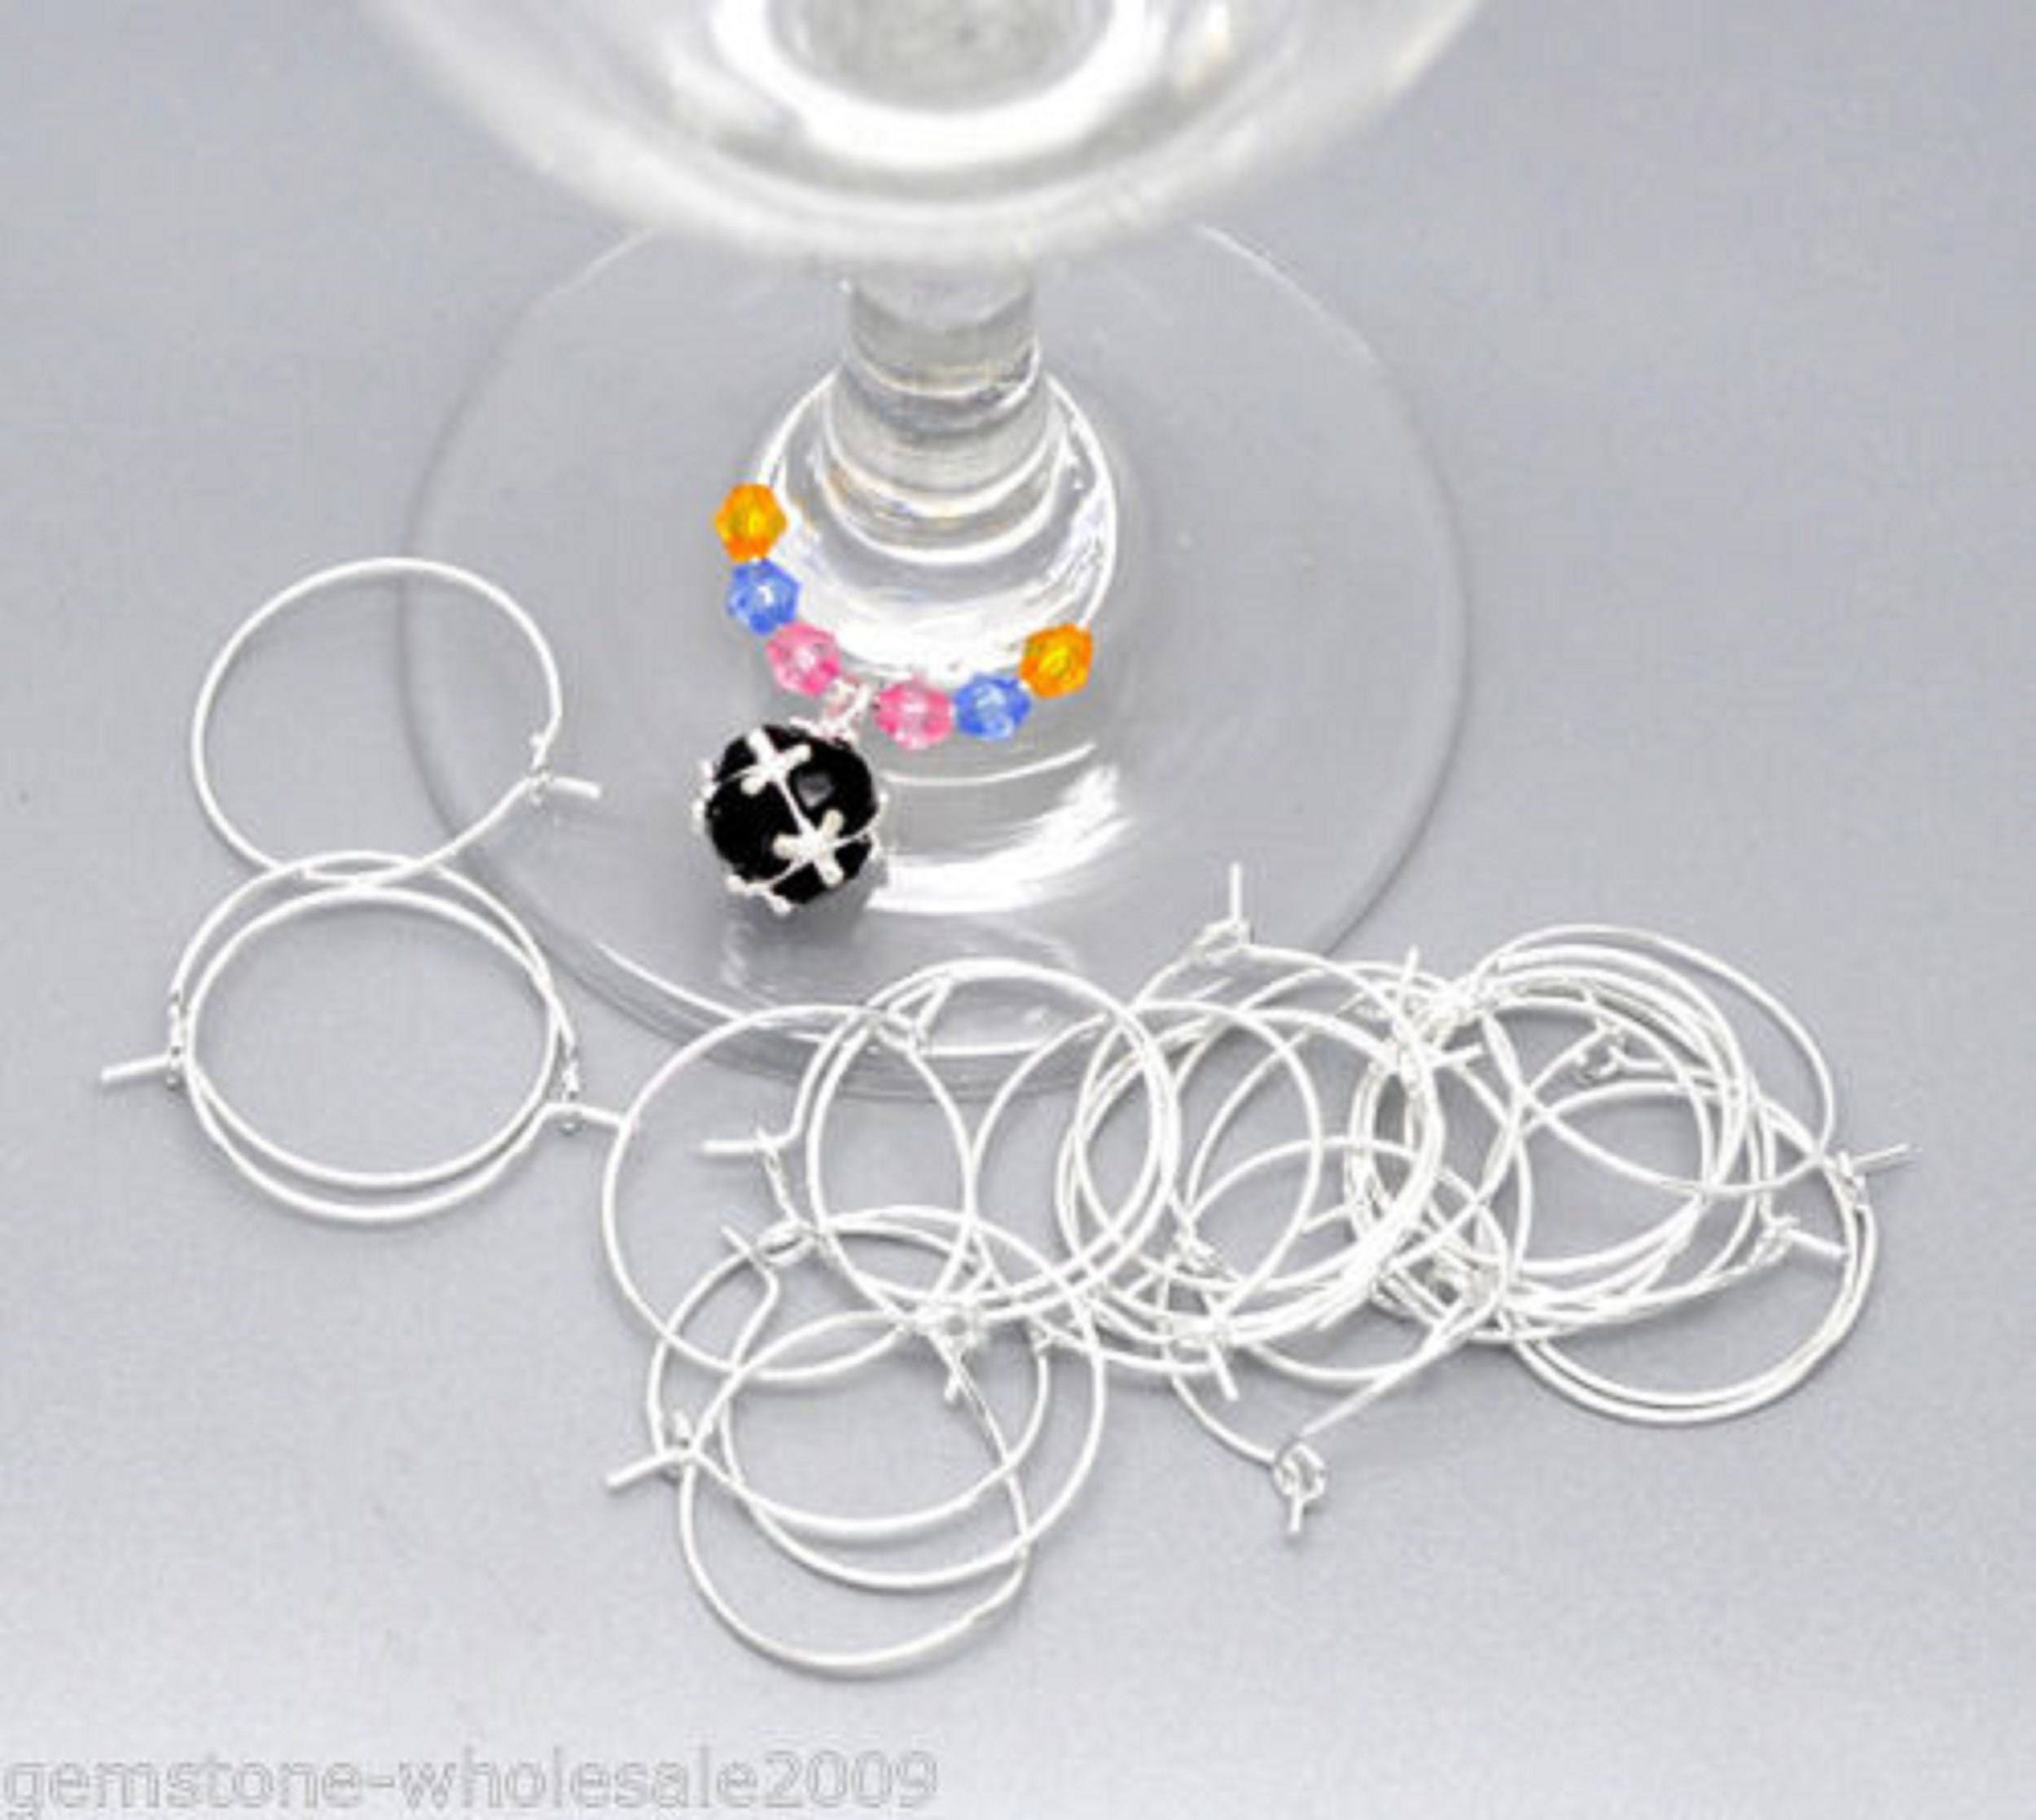 Wholesale SUNNYCLUE 1 Box 20 Sets Fruit Wine Glass Charms Drink